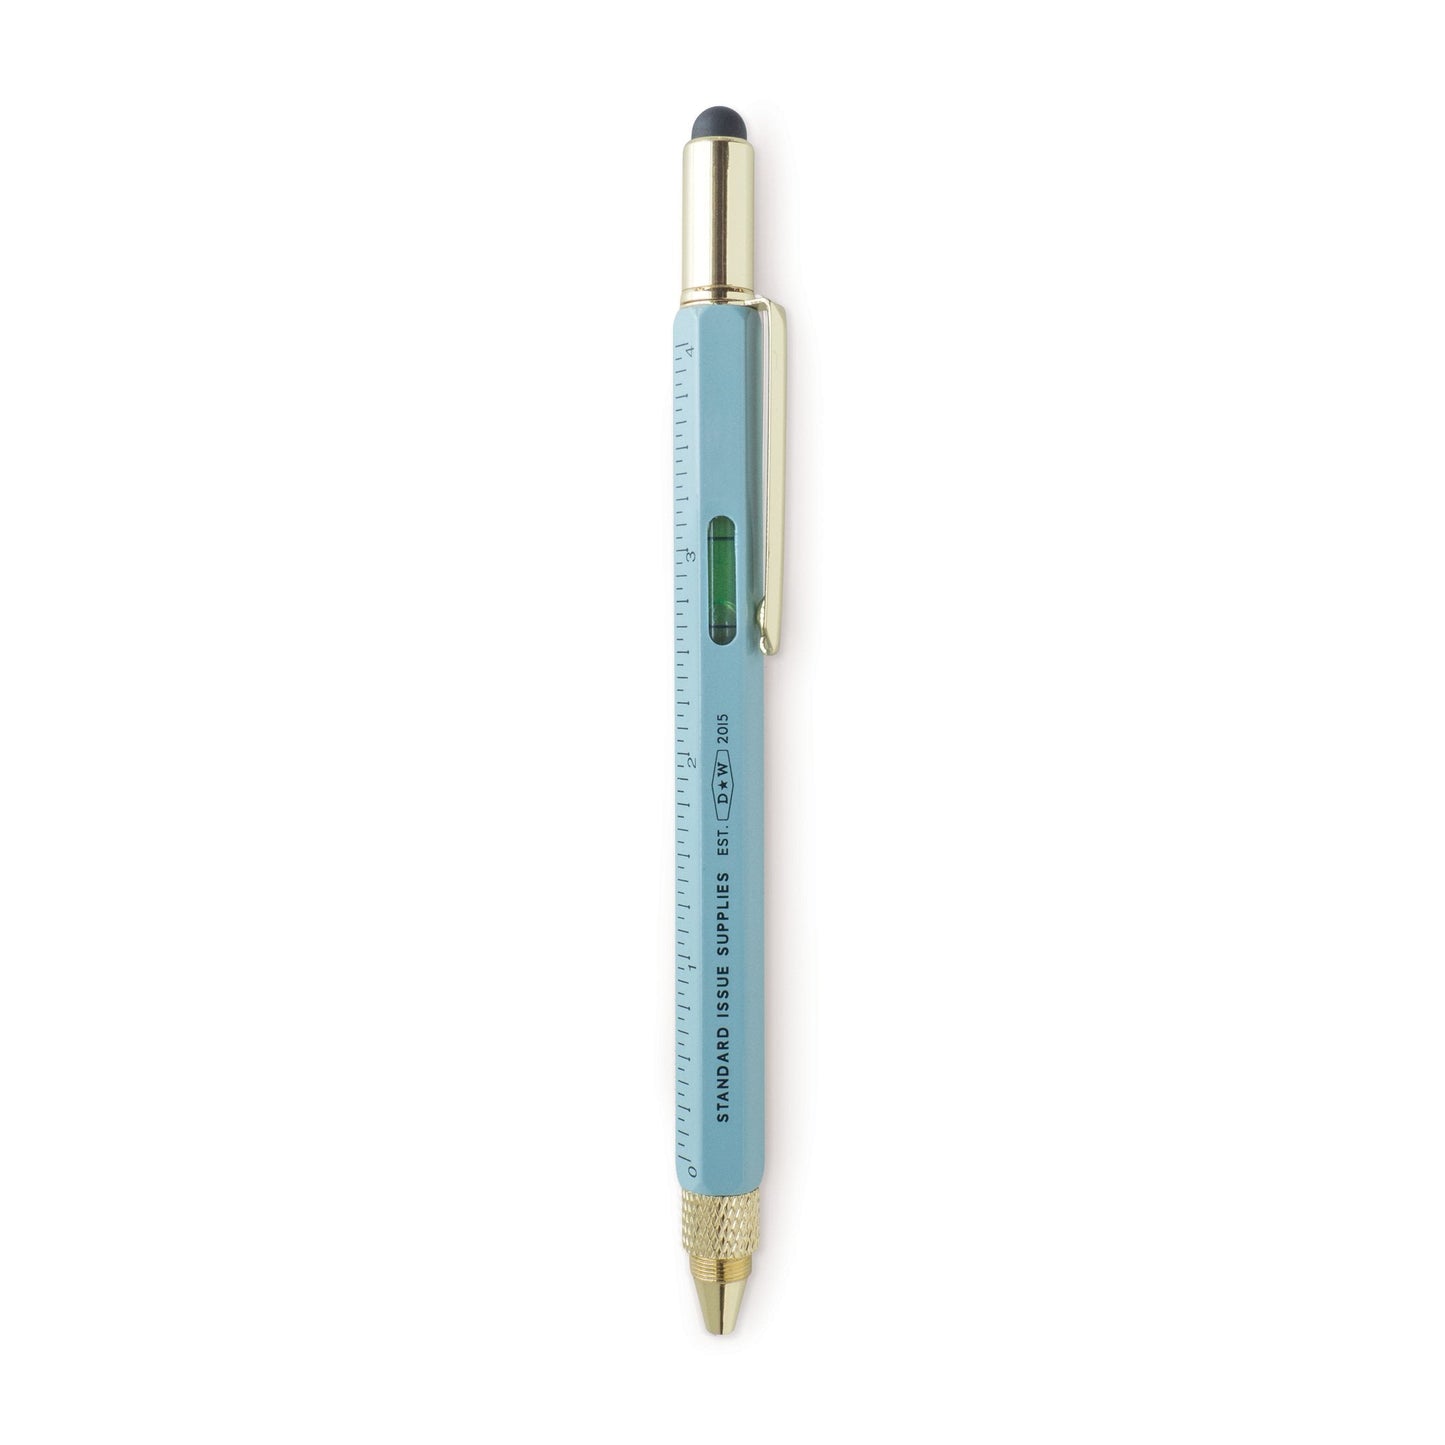 Blue tool multi function tool pen from the Pencil Me In stationery shop